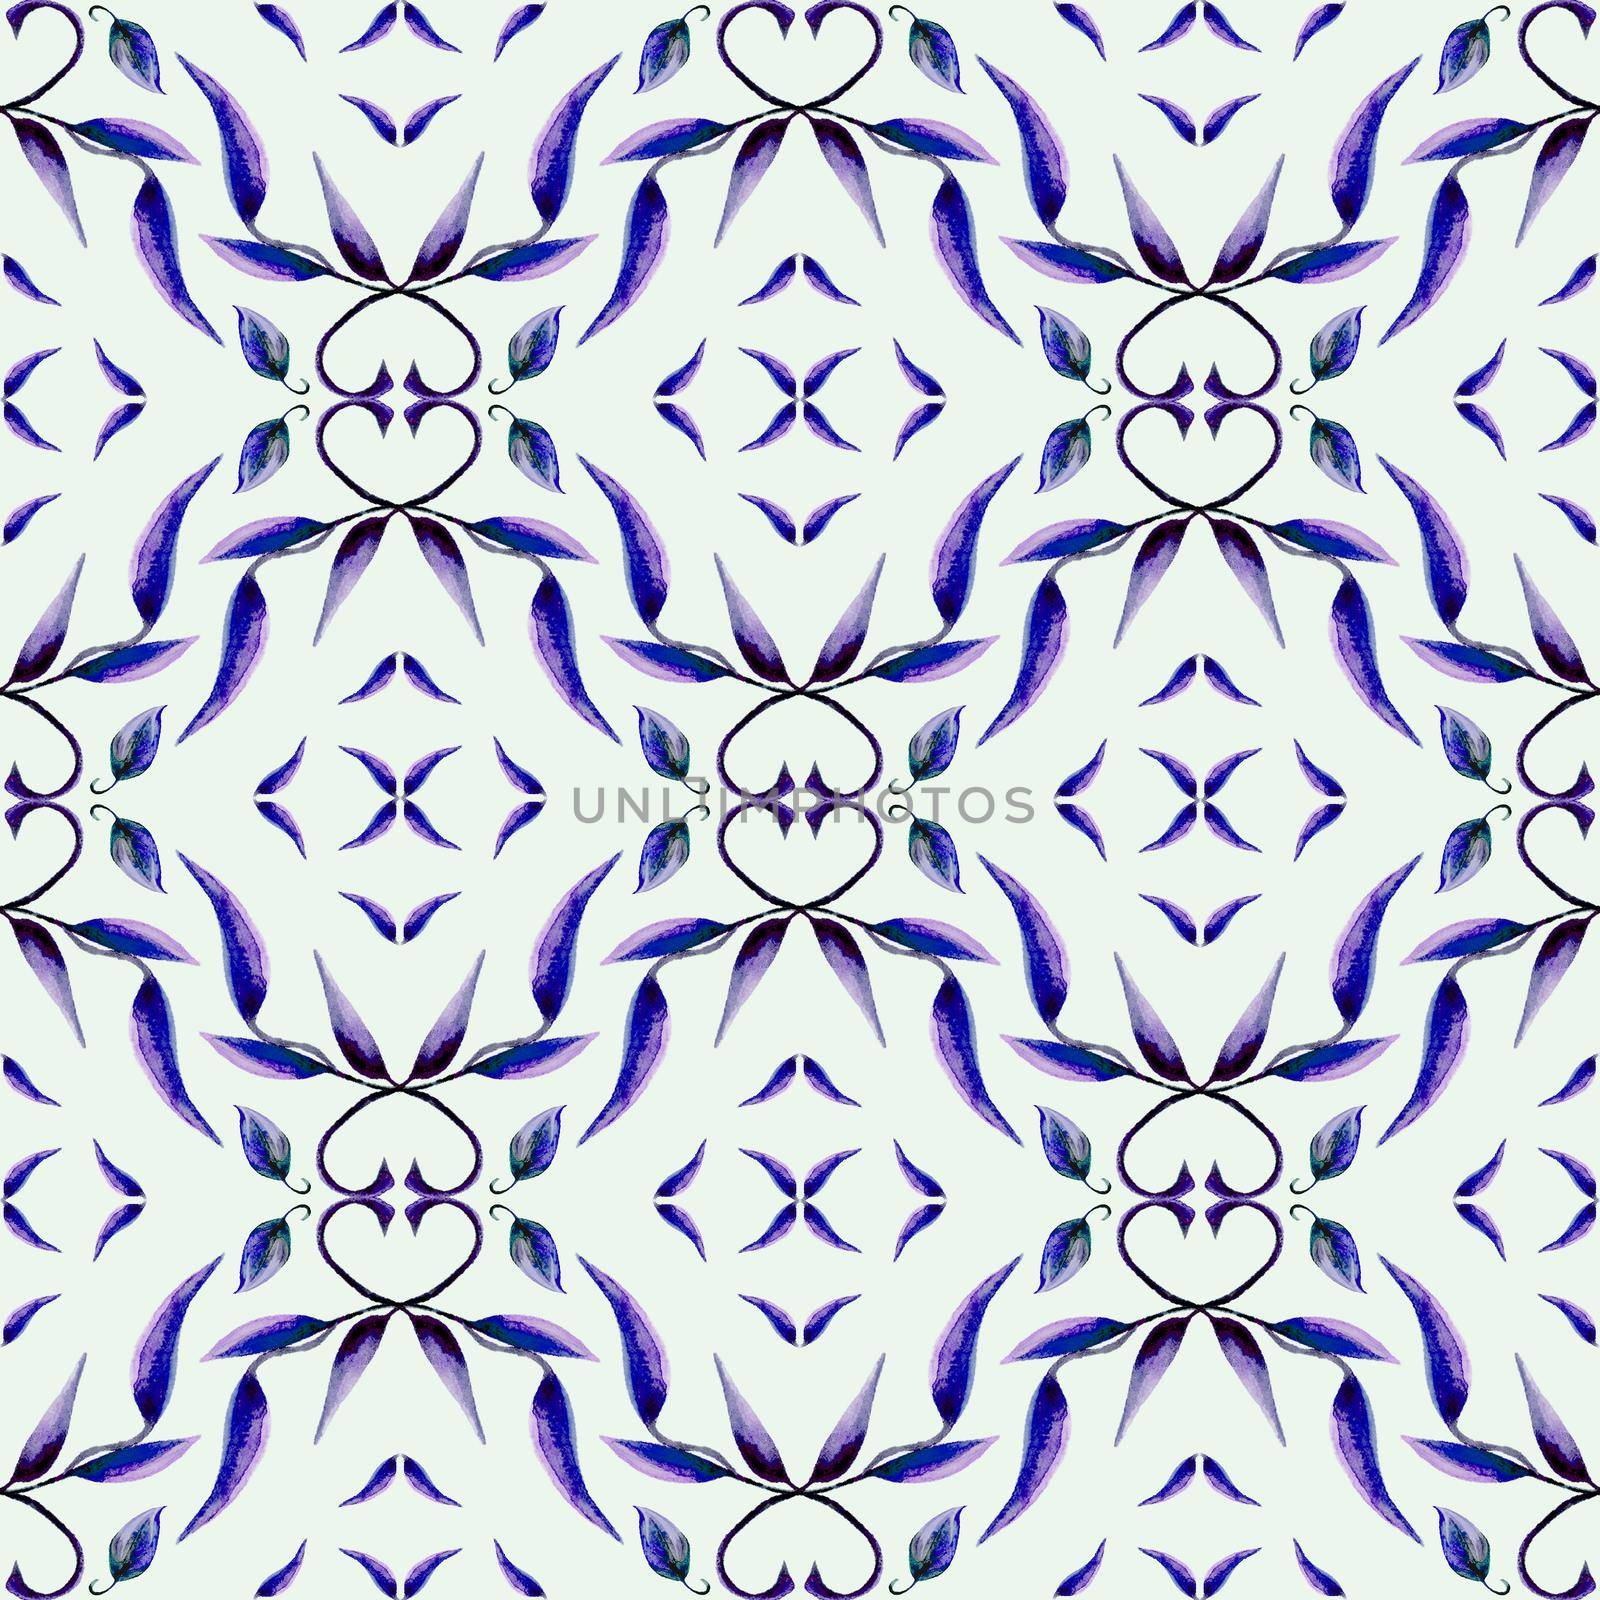 Purple and violet leaves watercolor ornamental pattern. Hand drawn illustration by fireFLYart